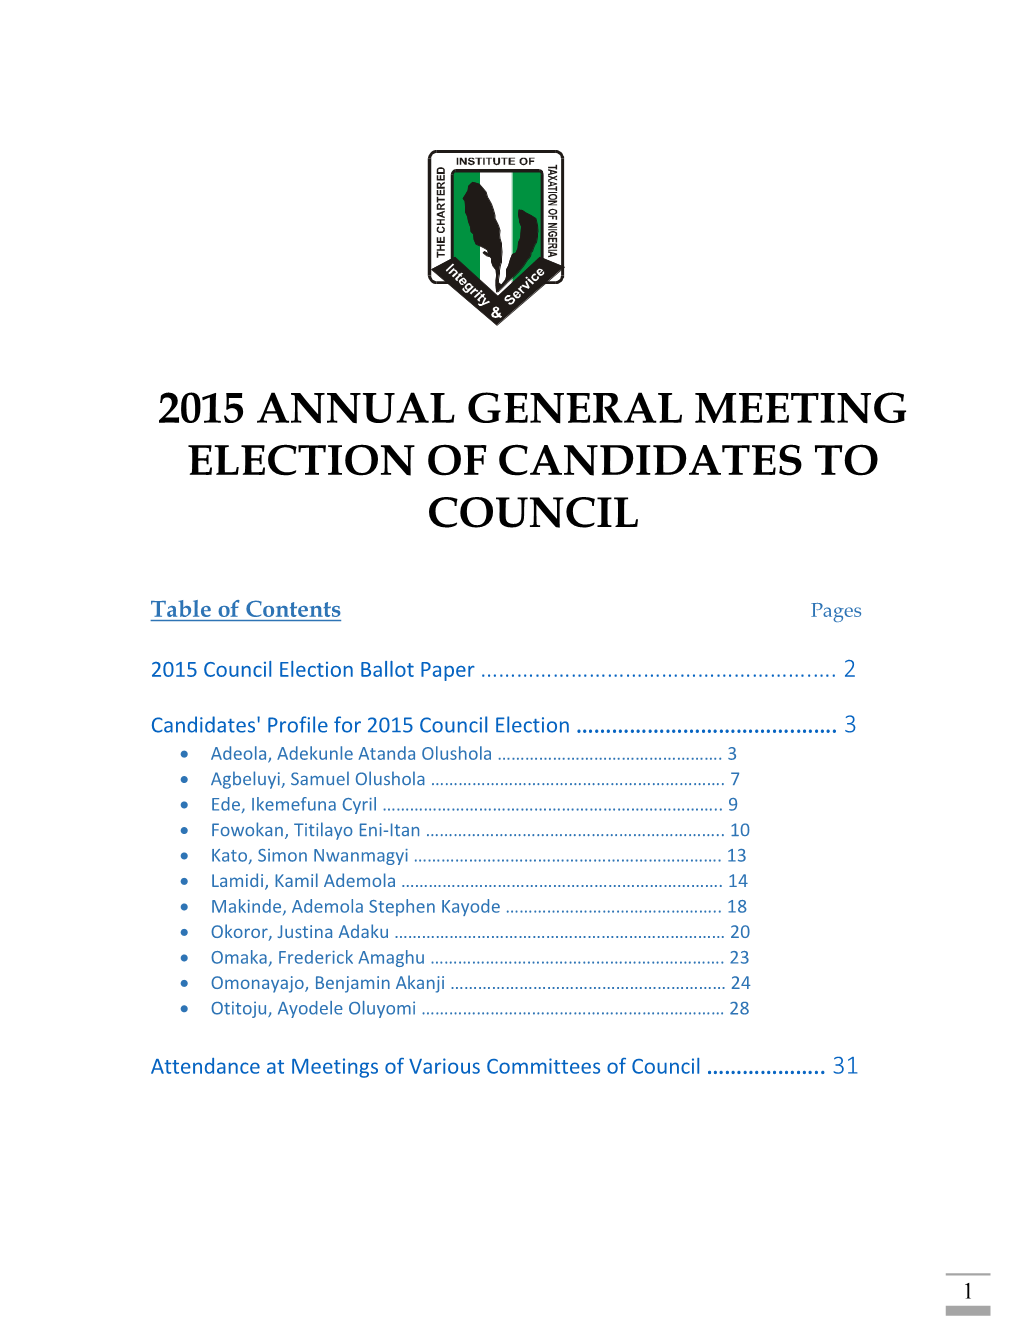 2015 Annual General Meeting Election of Candidates to Council